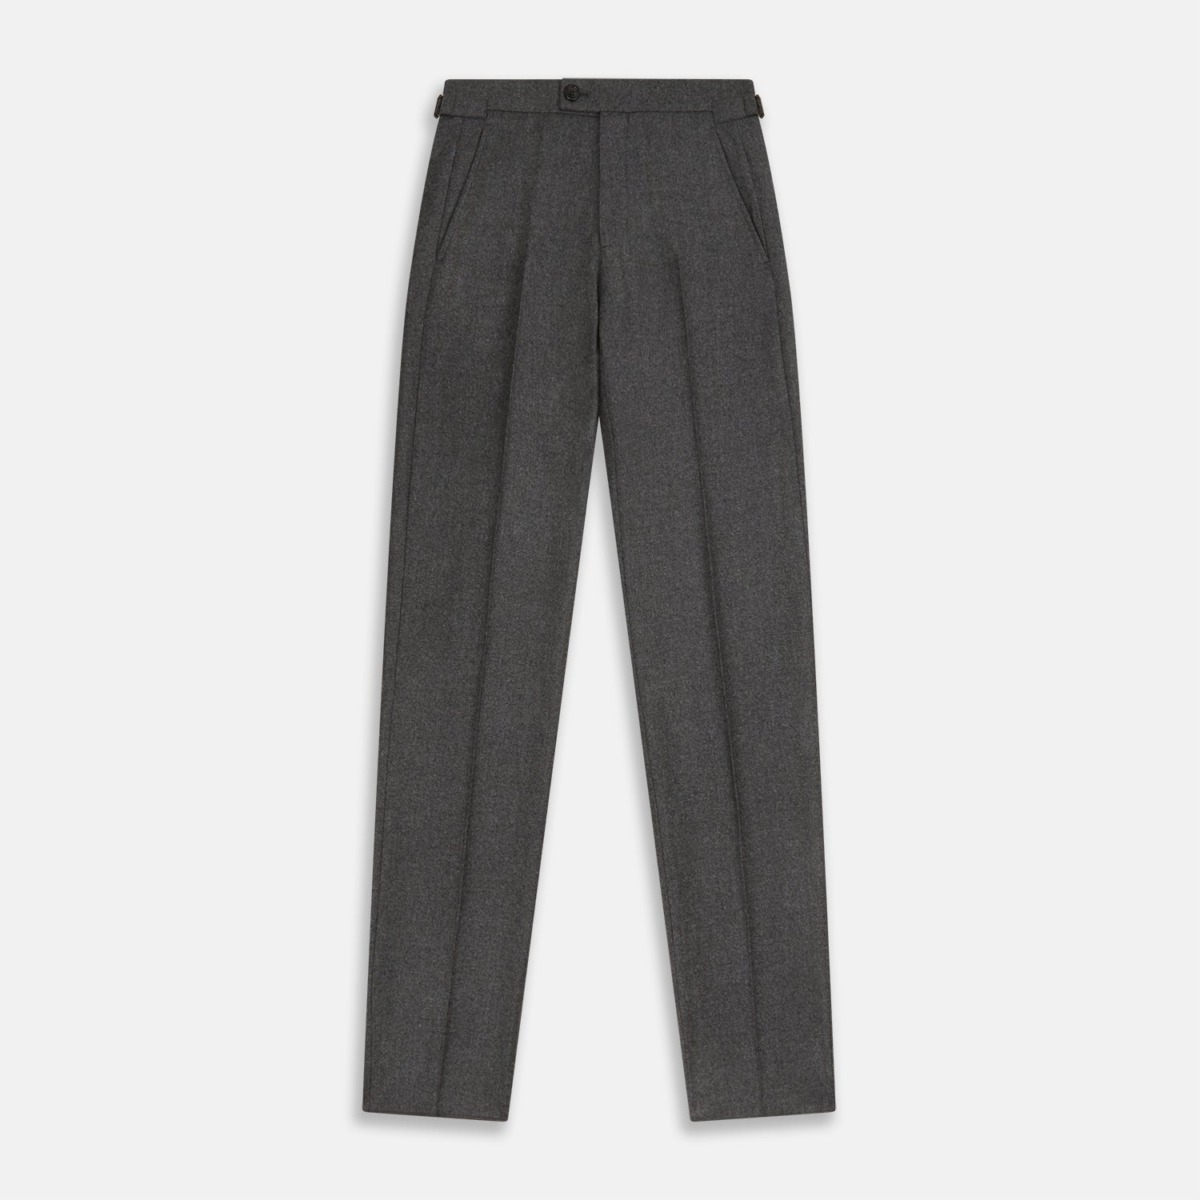 Turnbull And Asser Trousers in Grey from Turnbull & Asser GOOFASH